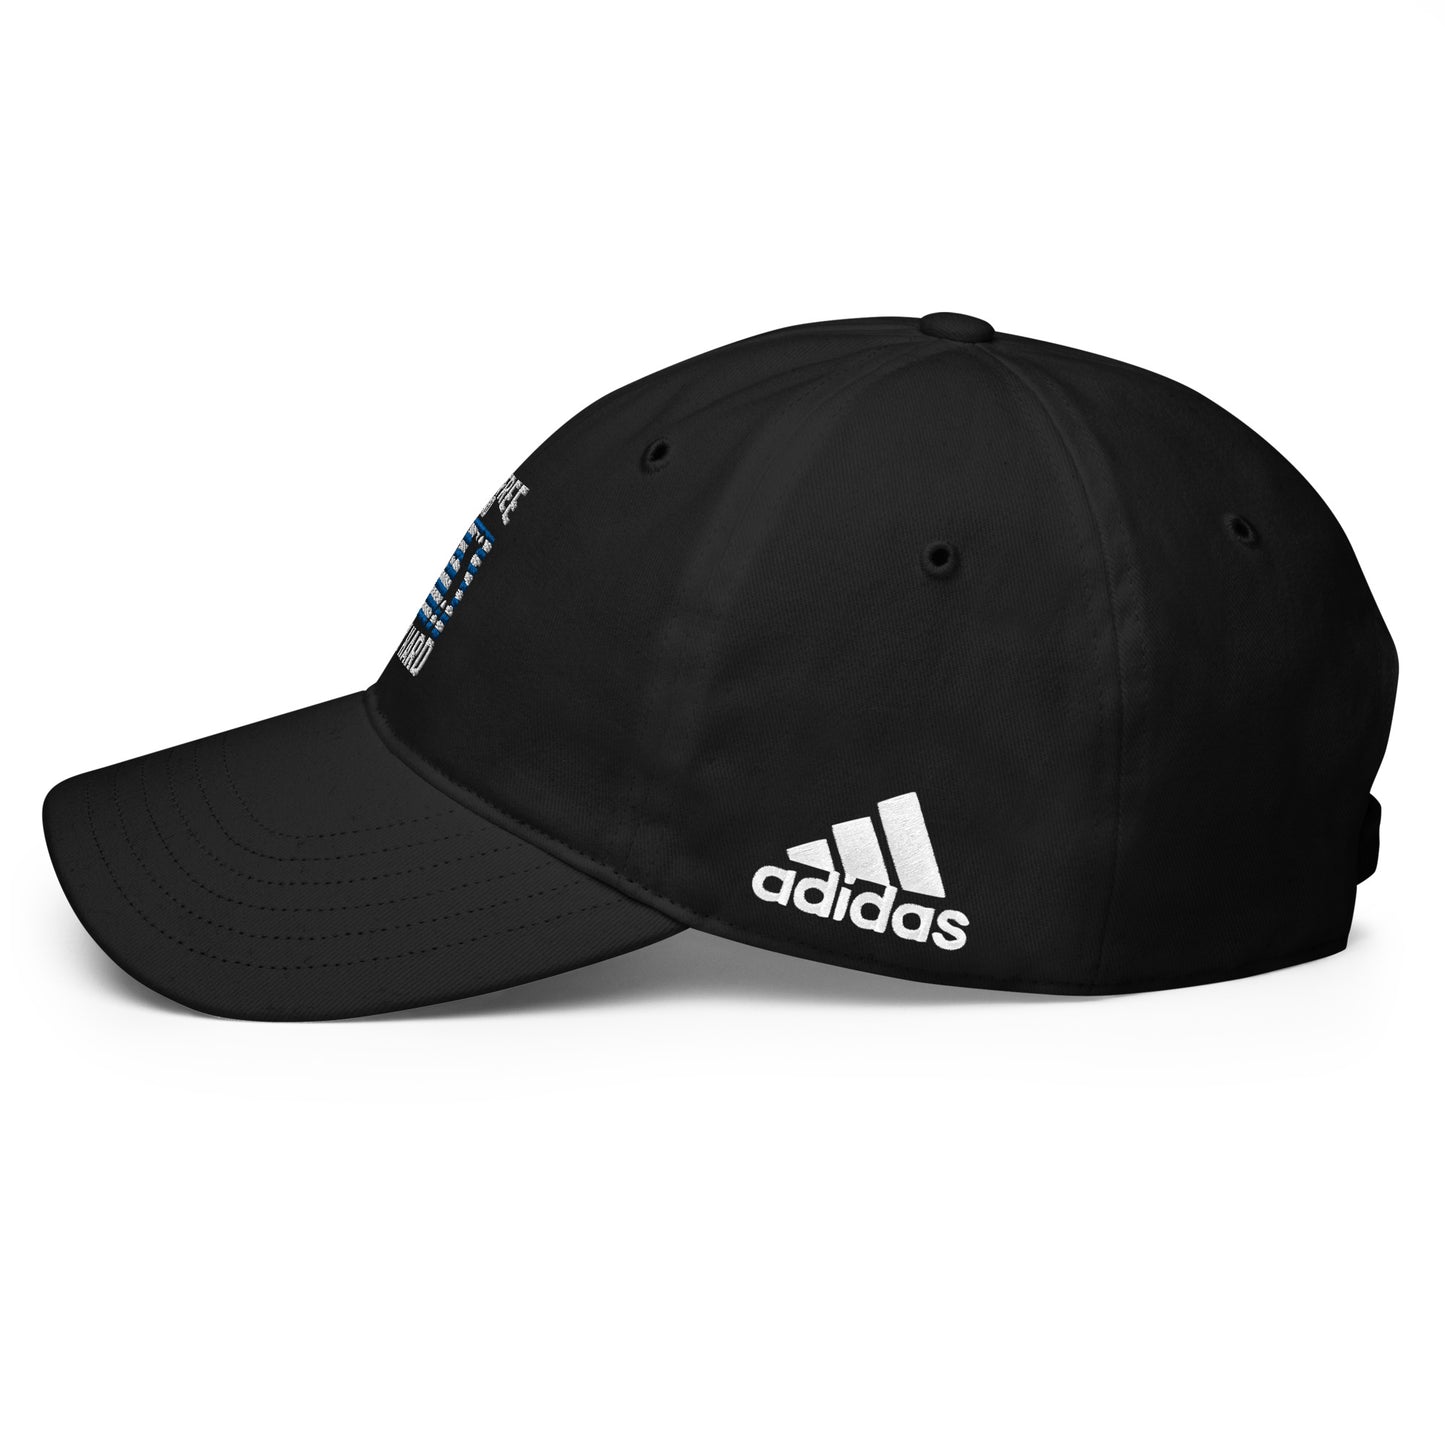 Adidas 'Live Free and Play Hard' Performance Golf Cap (Police Appreciation)